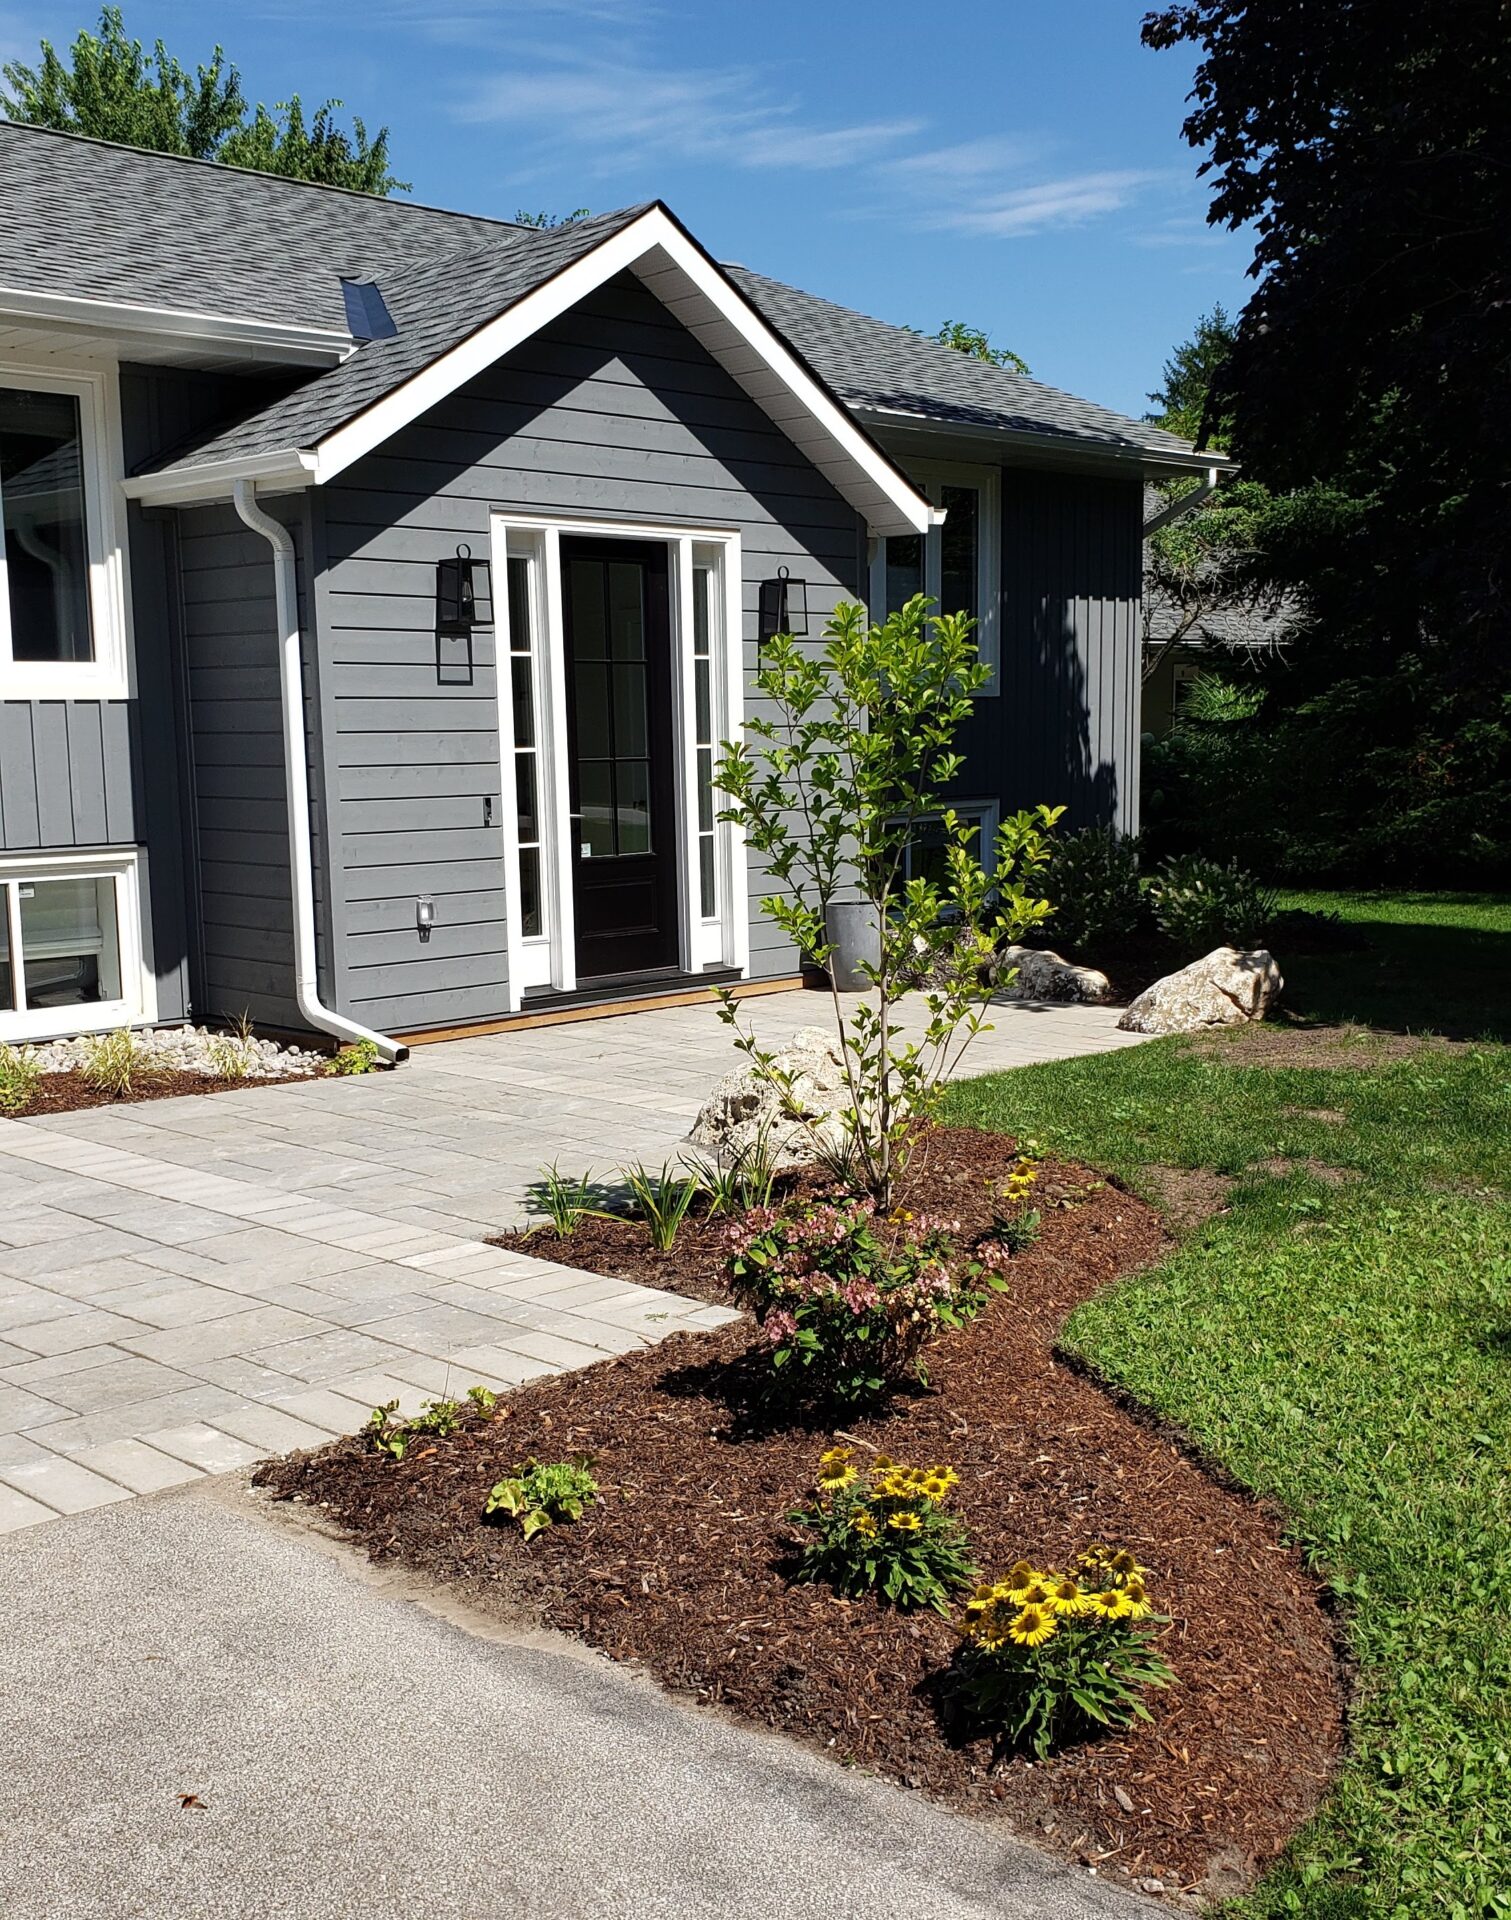 This is a residential grey house with a white-trimmed entryway, landscaping, a paver walkway, a small tree, flowering plants, and a sunny blue sky.